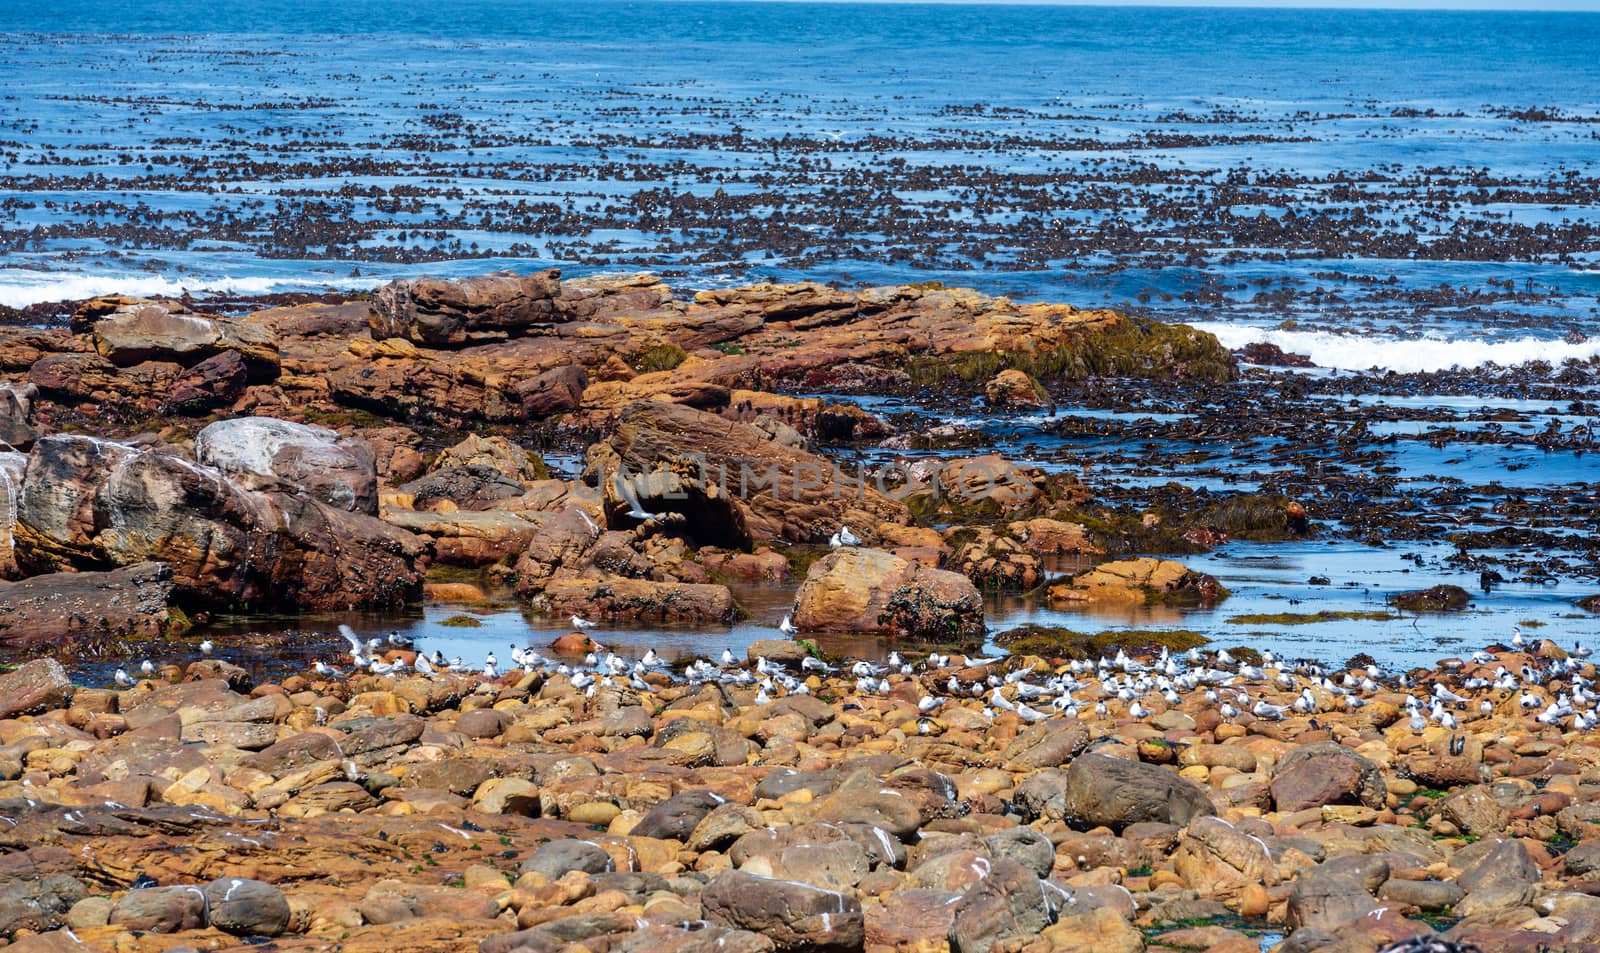 Sea Gulls gather on the rocky shores of the Cape of Good Hope.